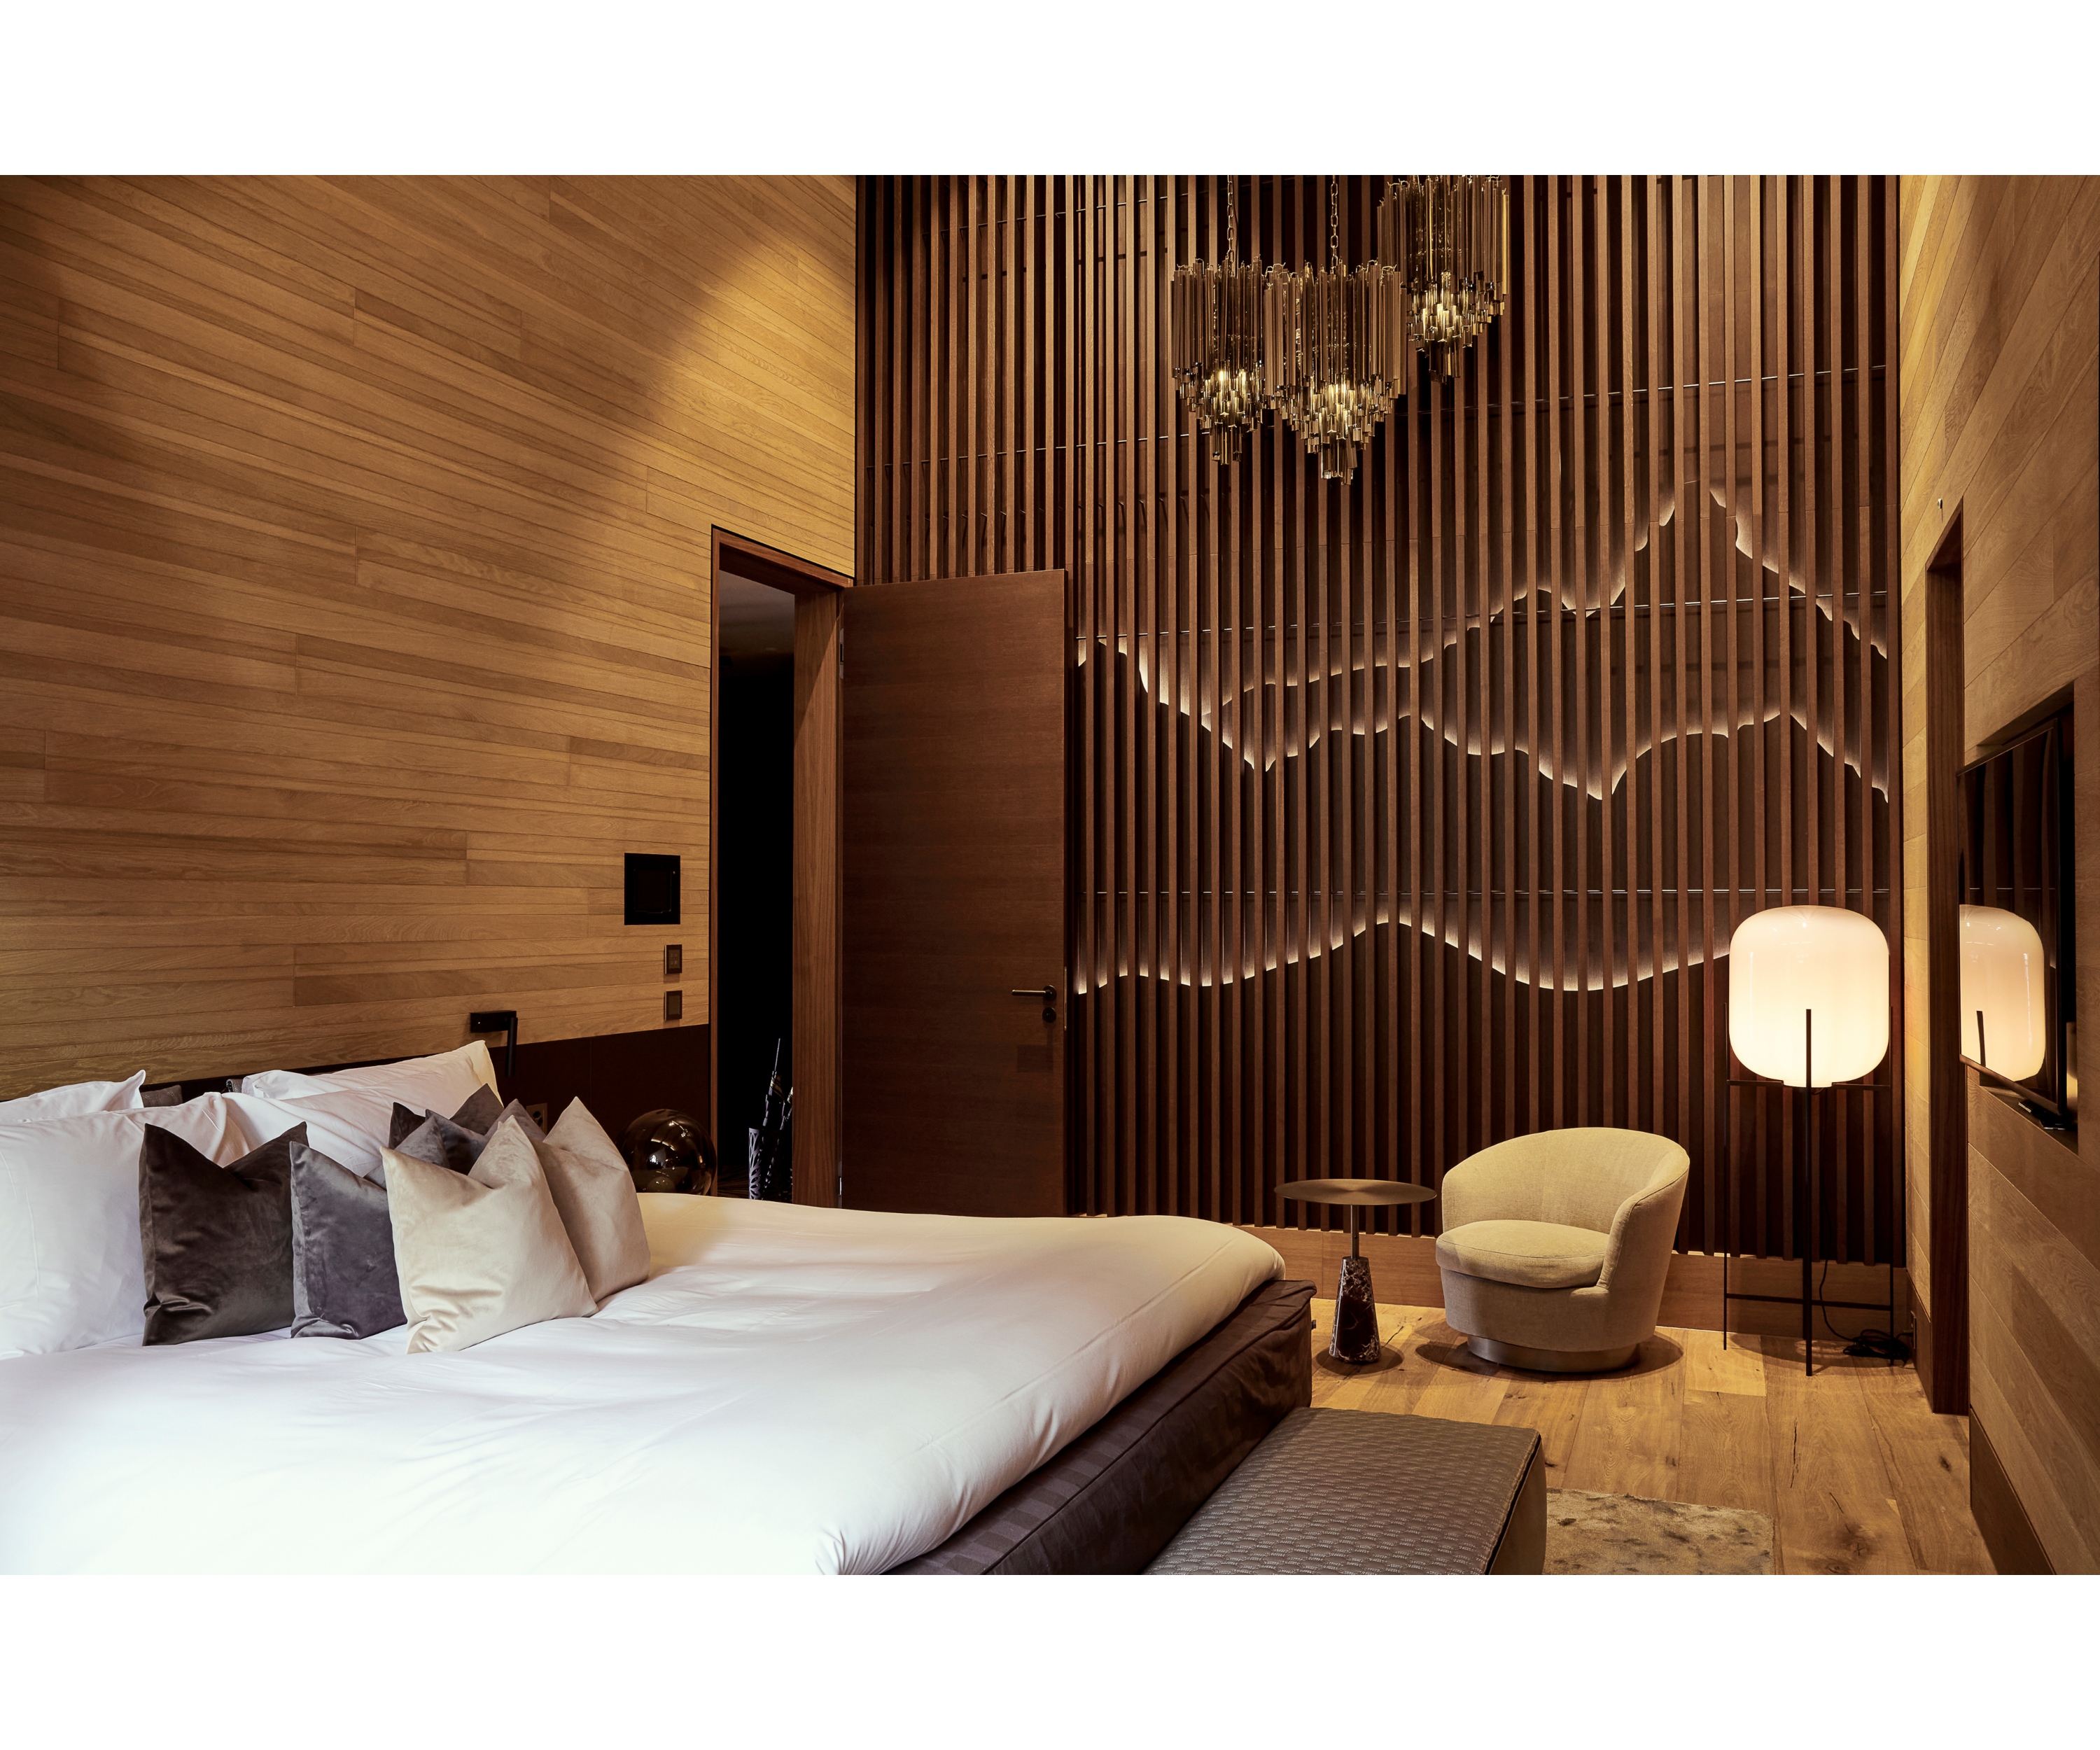 View of a room at The Chedi Andermatt with a wooden slatted wall that lets mountain ranges shimmer through it.